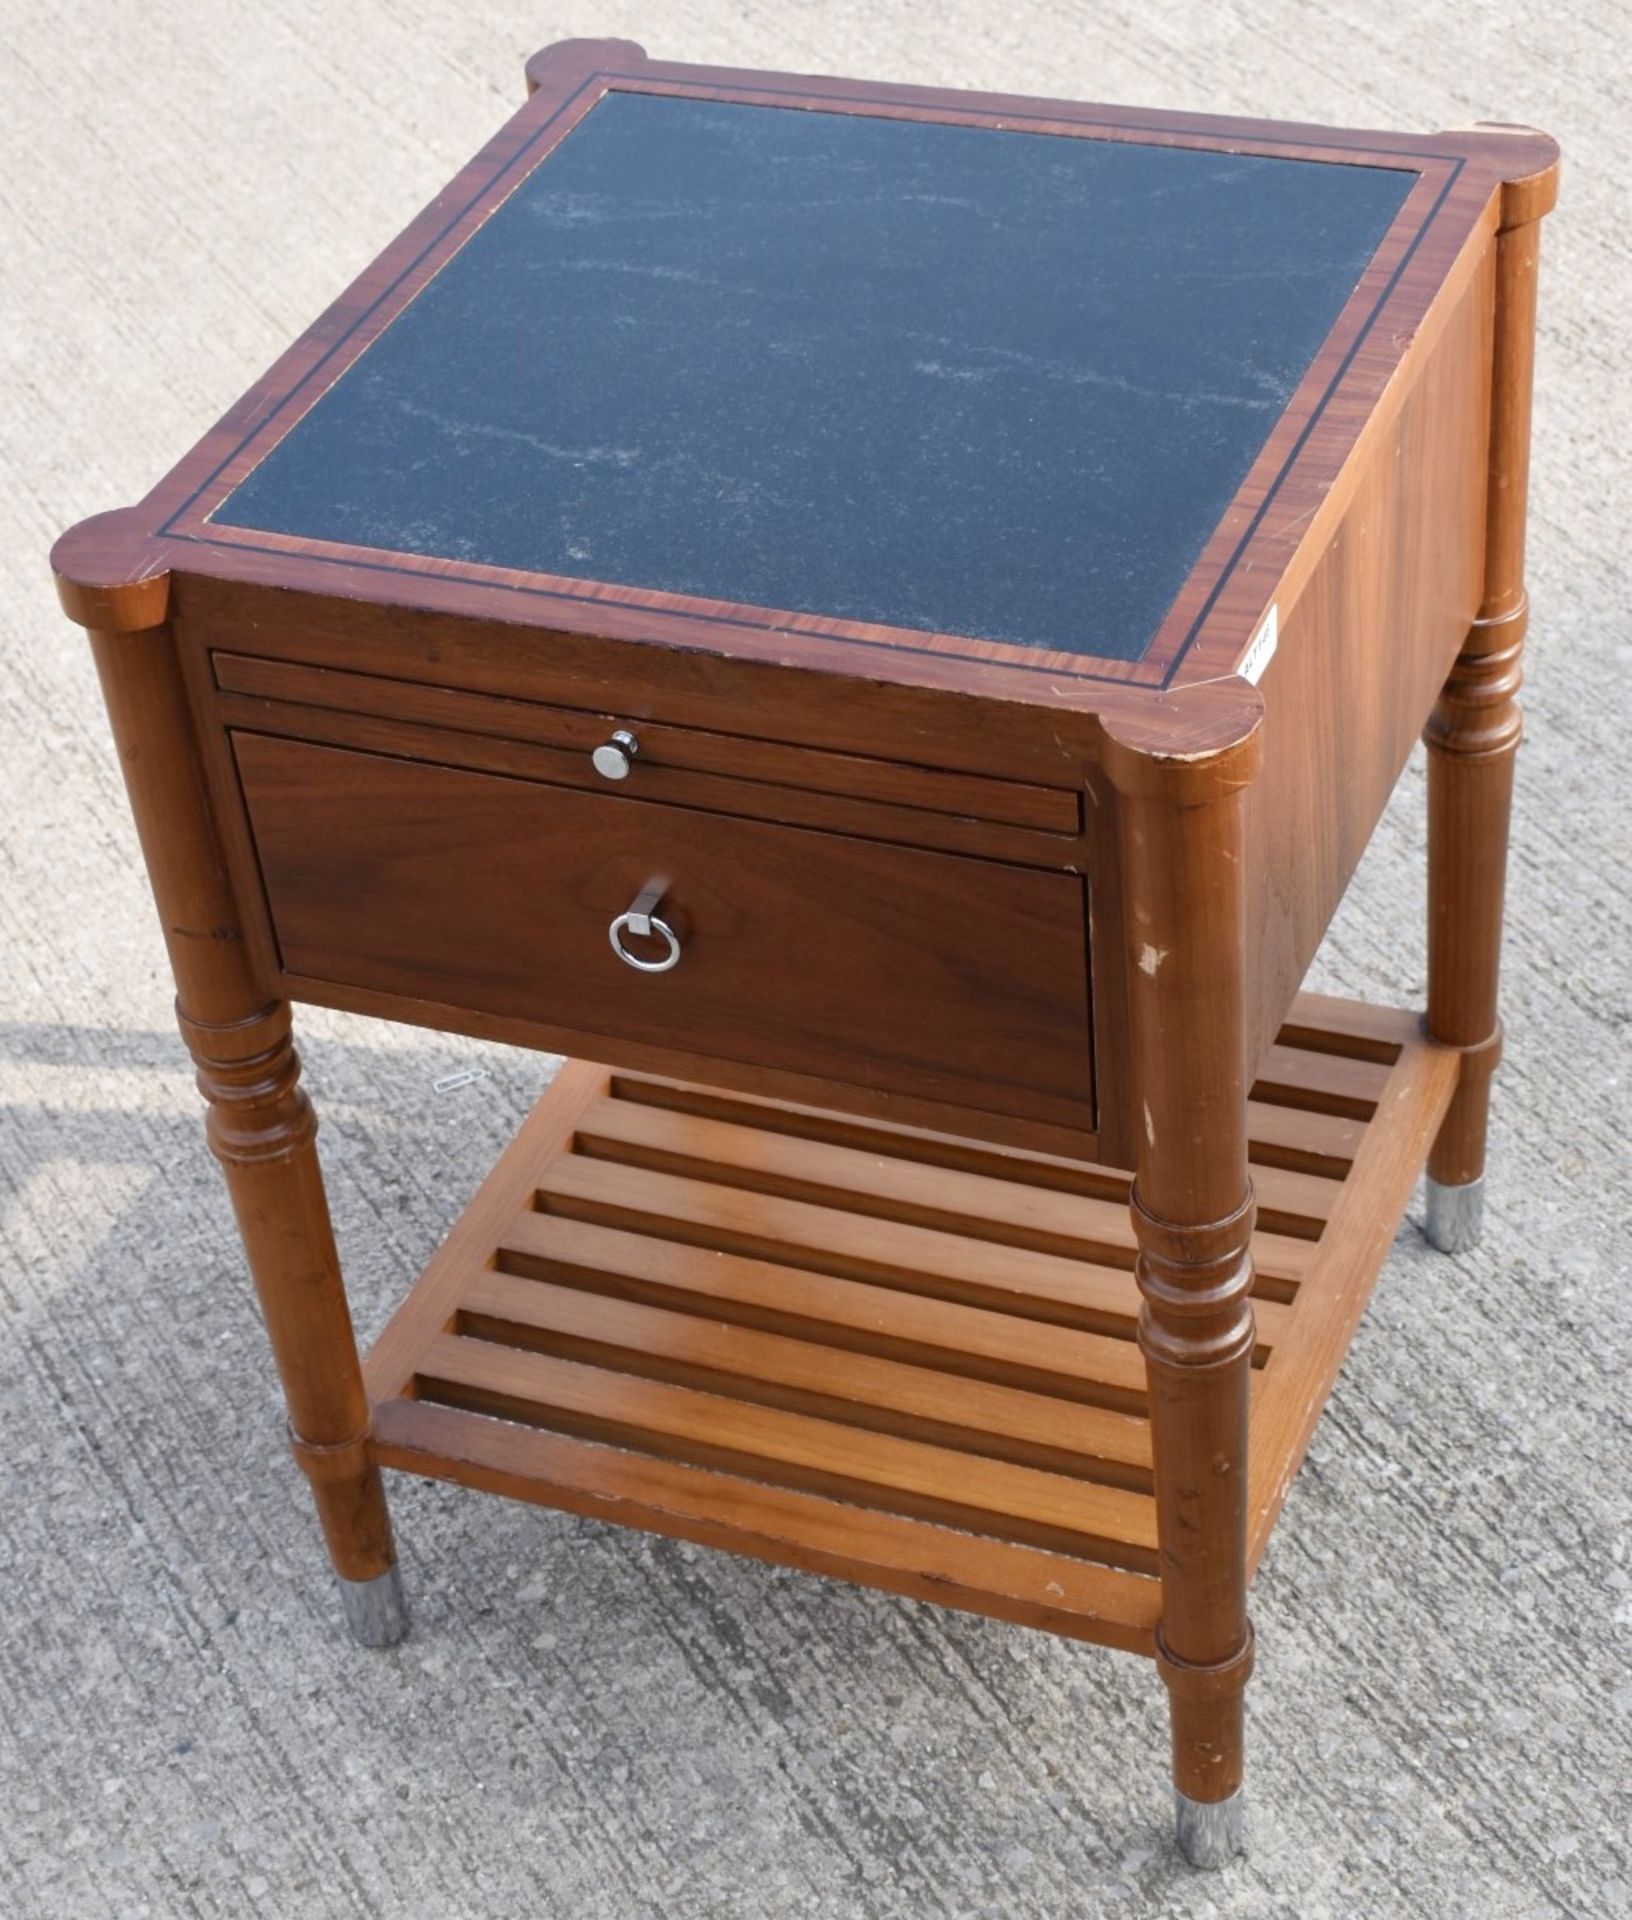 1 x CHANNELS Classically Styled Designer Solid Wood End Table with Pull-Out Tray, 1-Drawer Storage - Image 3 of 6